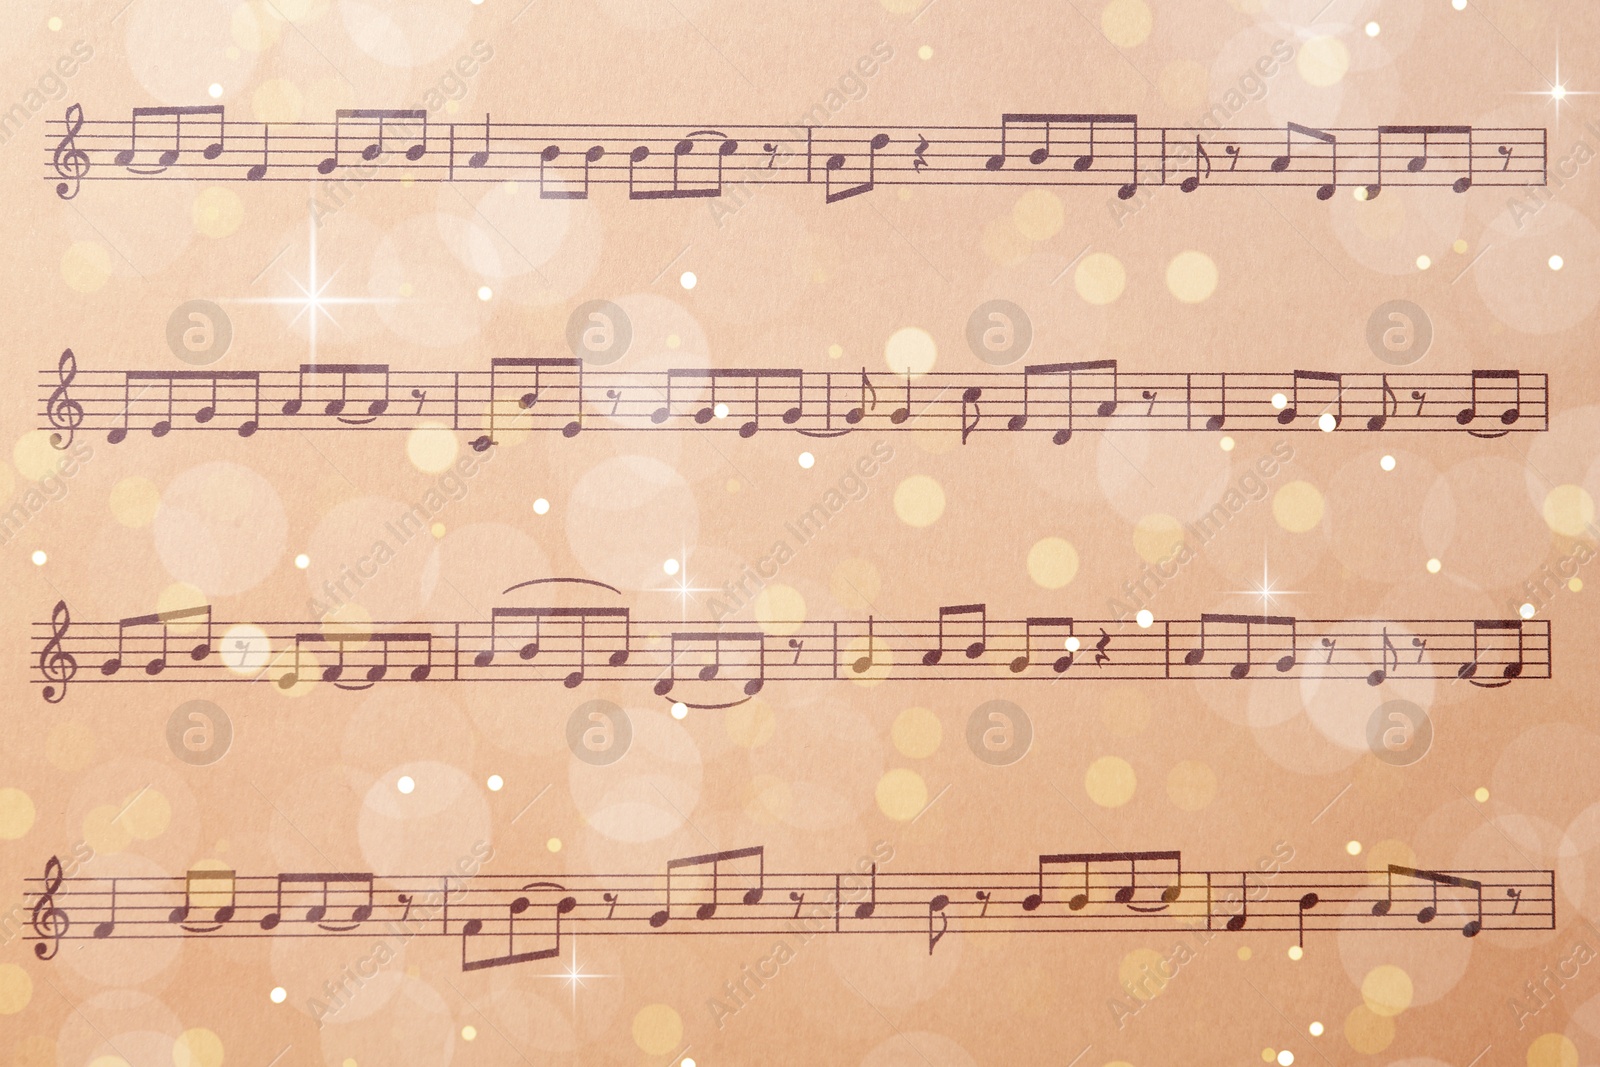 Image of Paper sheet with musical notes, closeup view